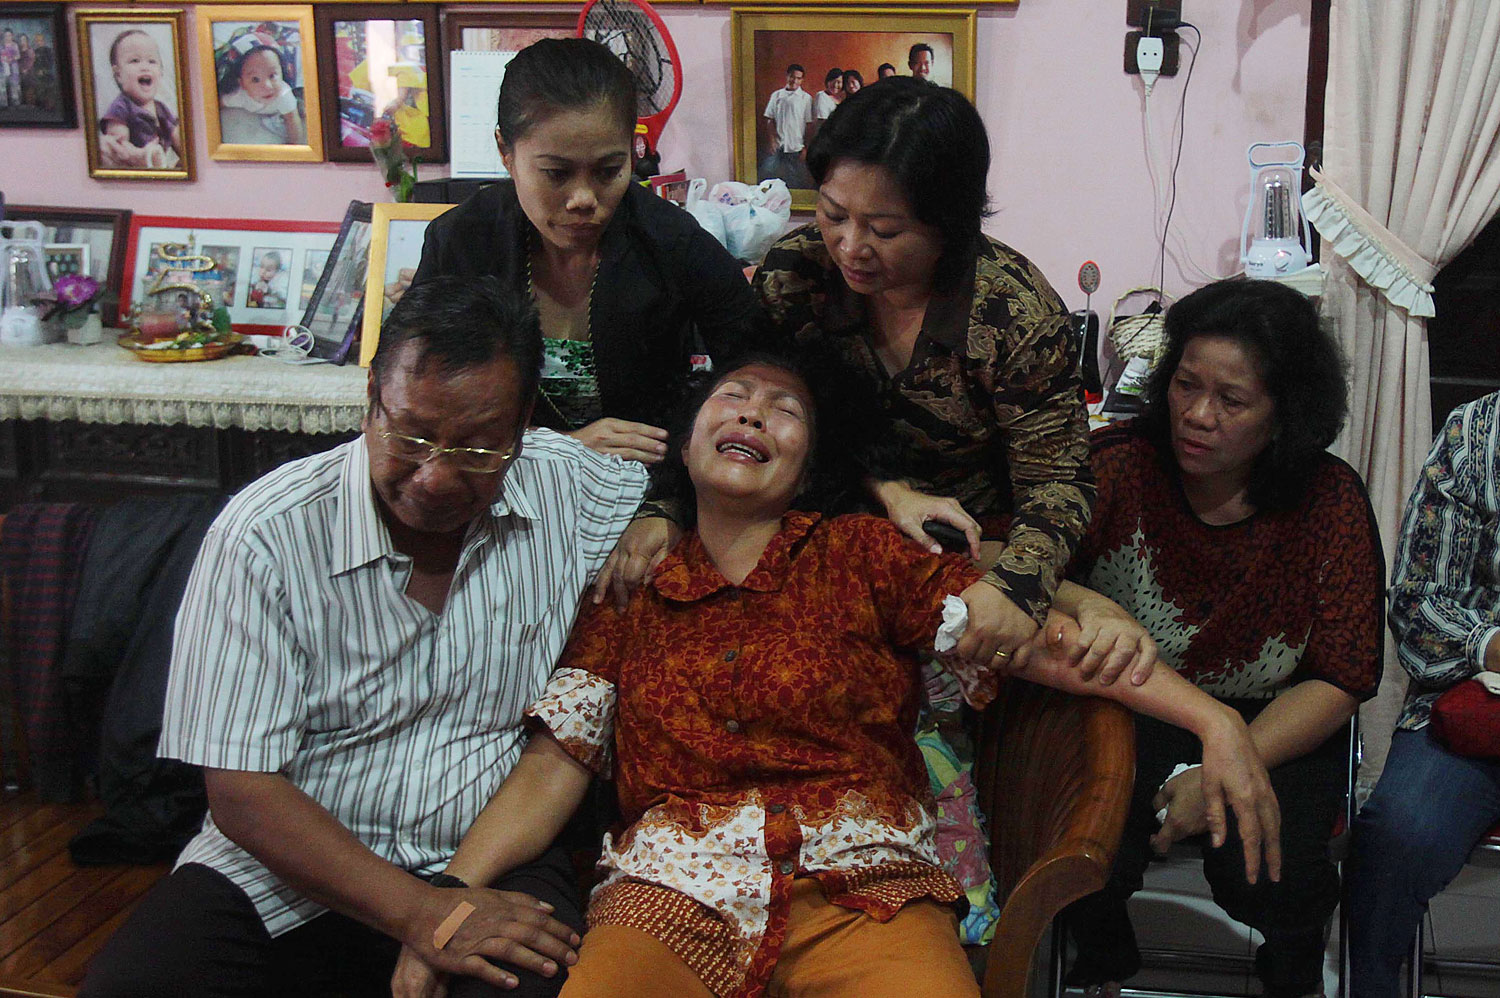 Risman Siregar, left, comforts his wife Erlina Panjaitan, center — both are parents of Firman Chandra Siregar, a 24-year-old Indonesian passenger of Malaysia Airlines Flight 370 — on March 9, 2014, in Medan, Indonesia (Atar—AFP/Getty Images)